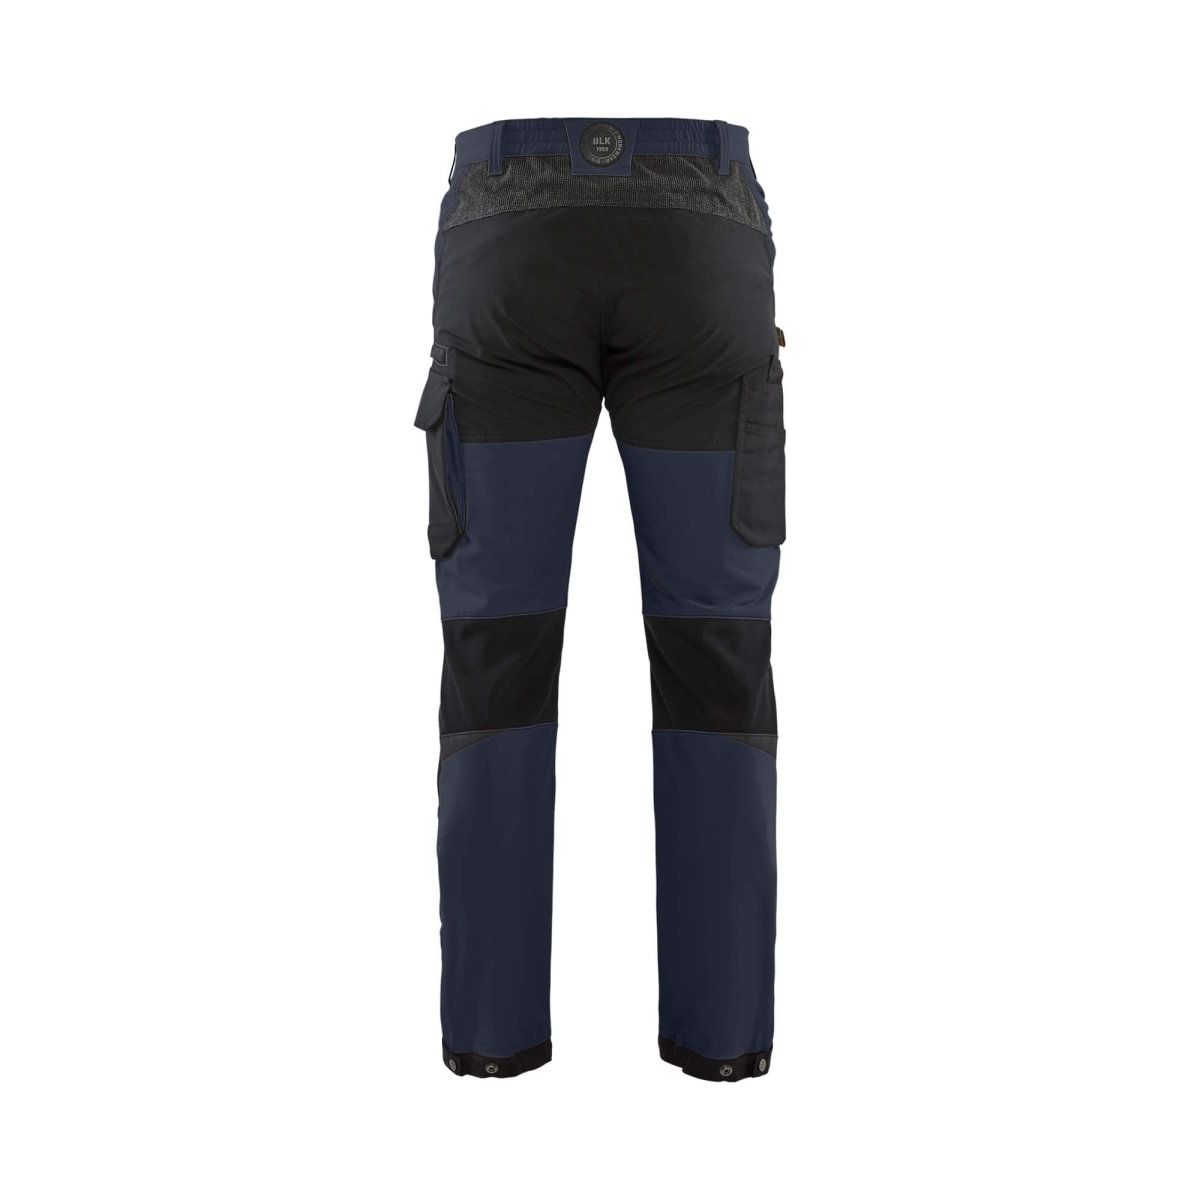 Blaklader 1422 4-Way-Stretch Trousers Cordura - Mens (14221645) - (Colours 2 of 2) - workweargurus.com